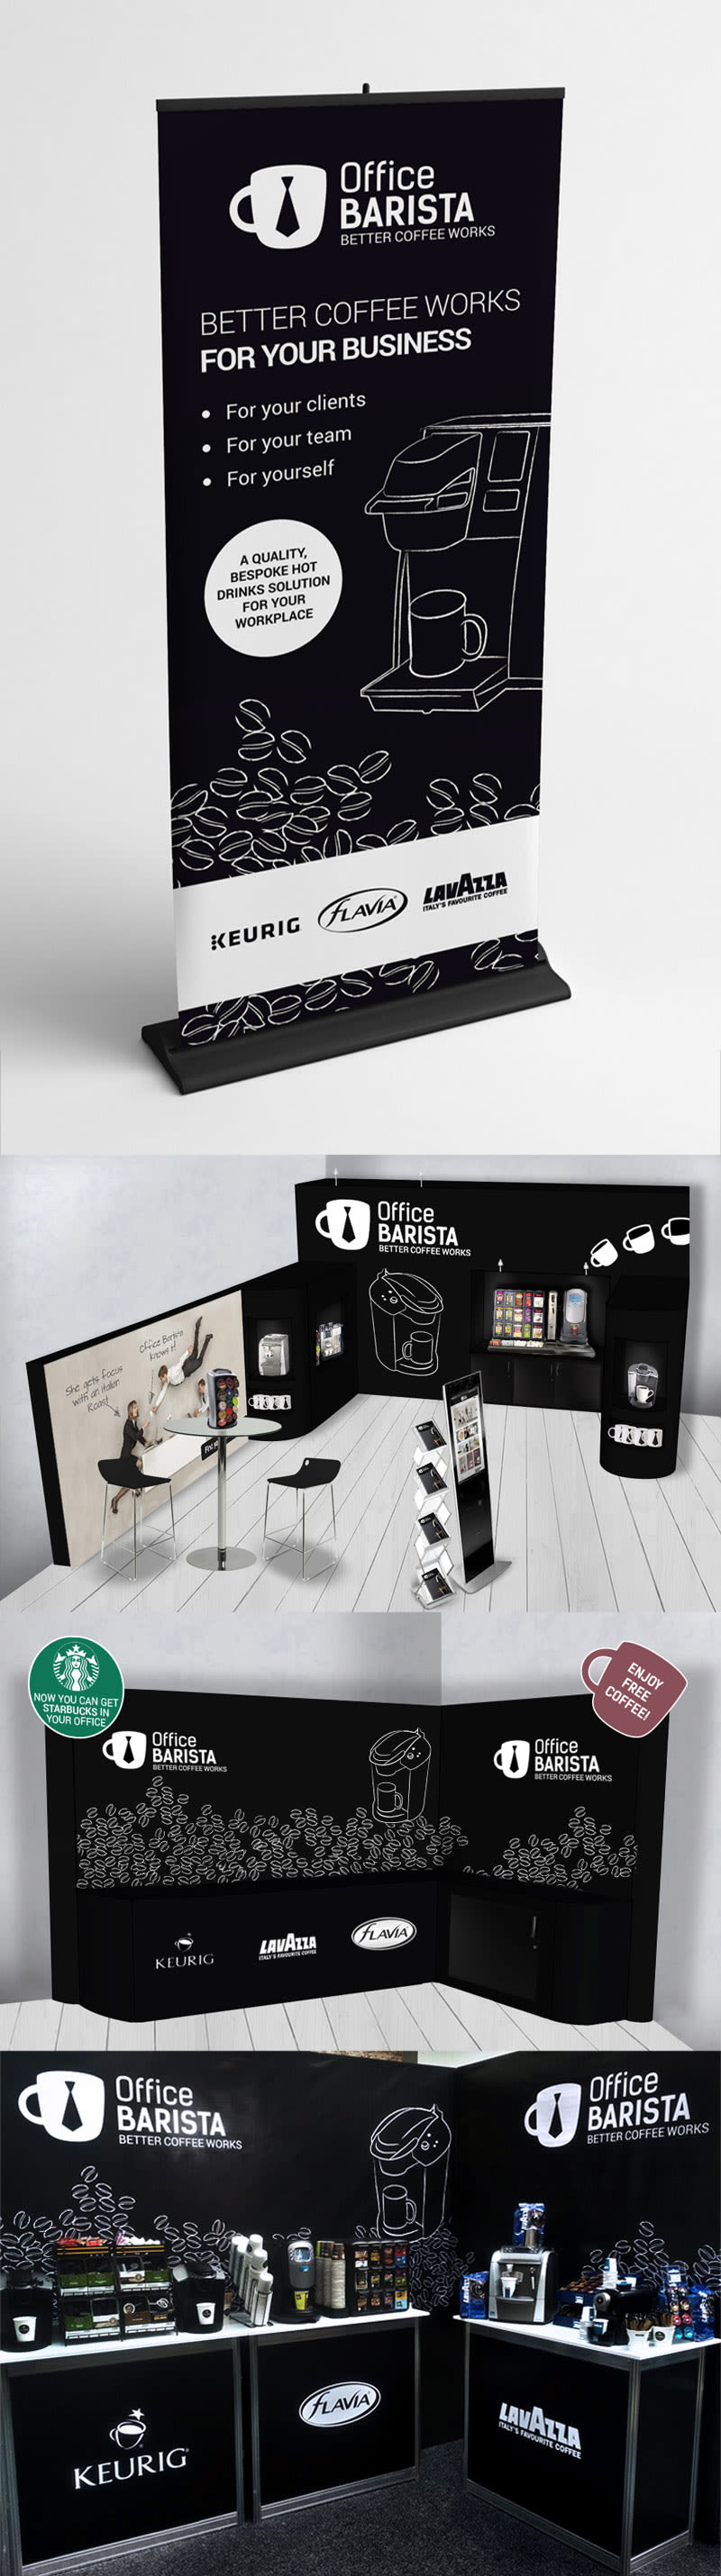 Office Barista. Banner, Proposals and Stand. 0